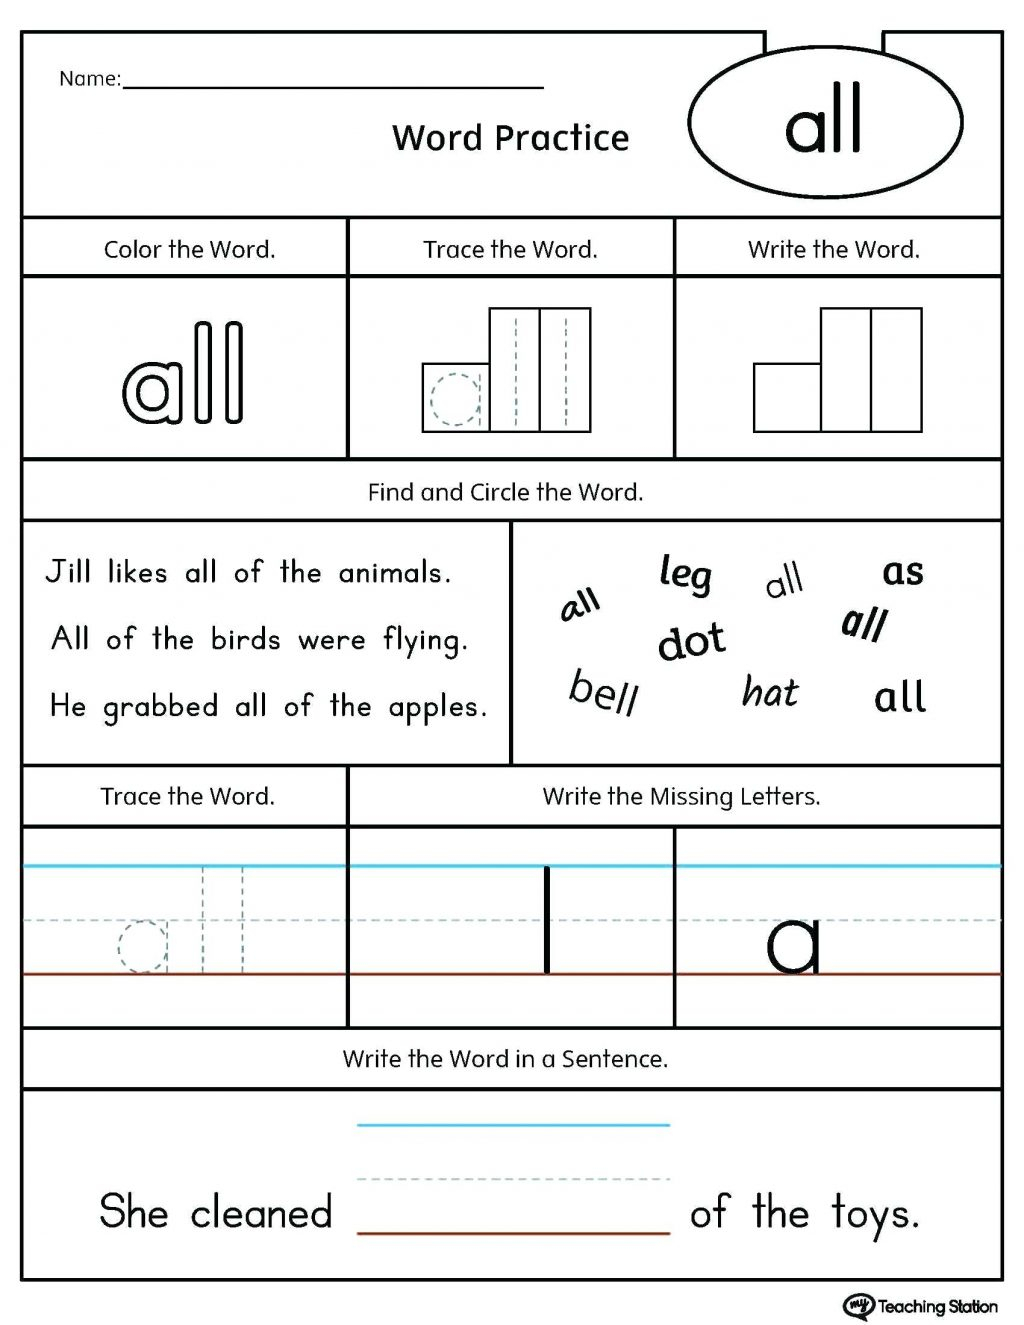 Number Words Tracing Worksheets E2 80 93 Terracesheet Co G intended for Tracing Letters Worksheet Maker